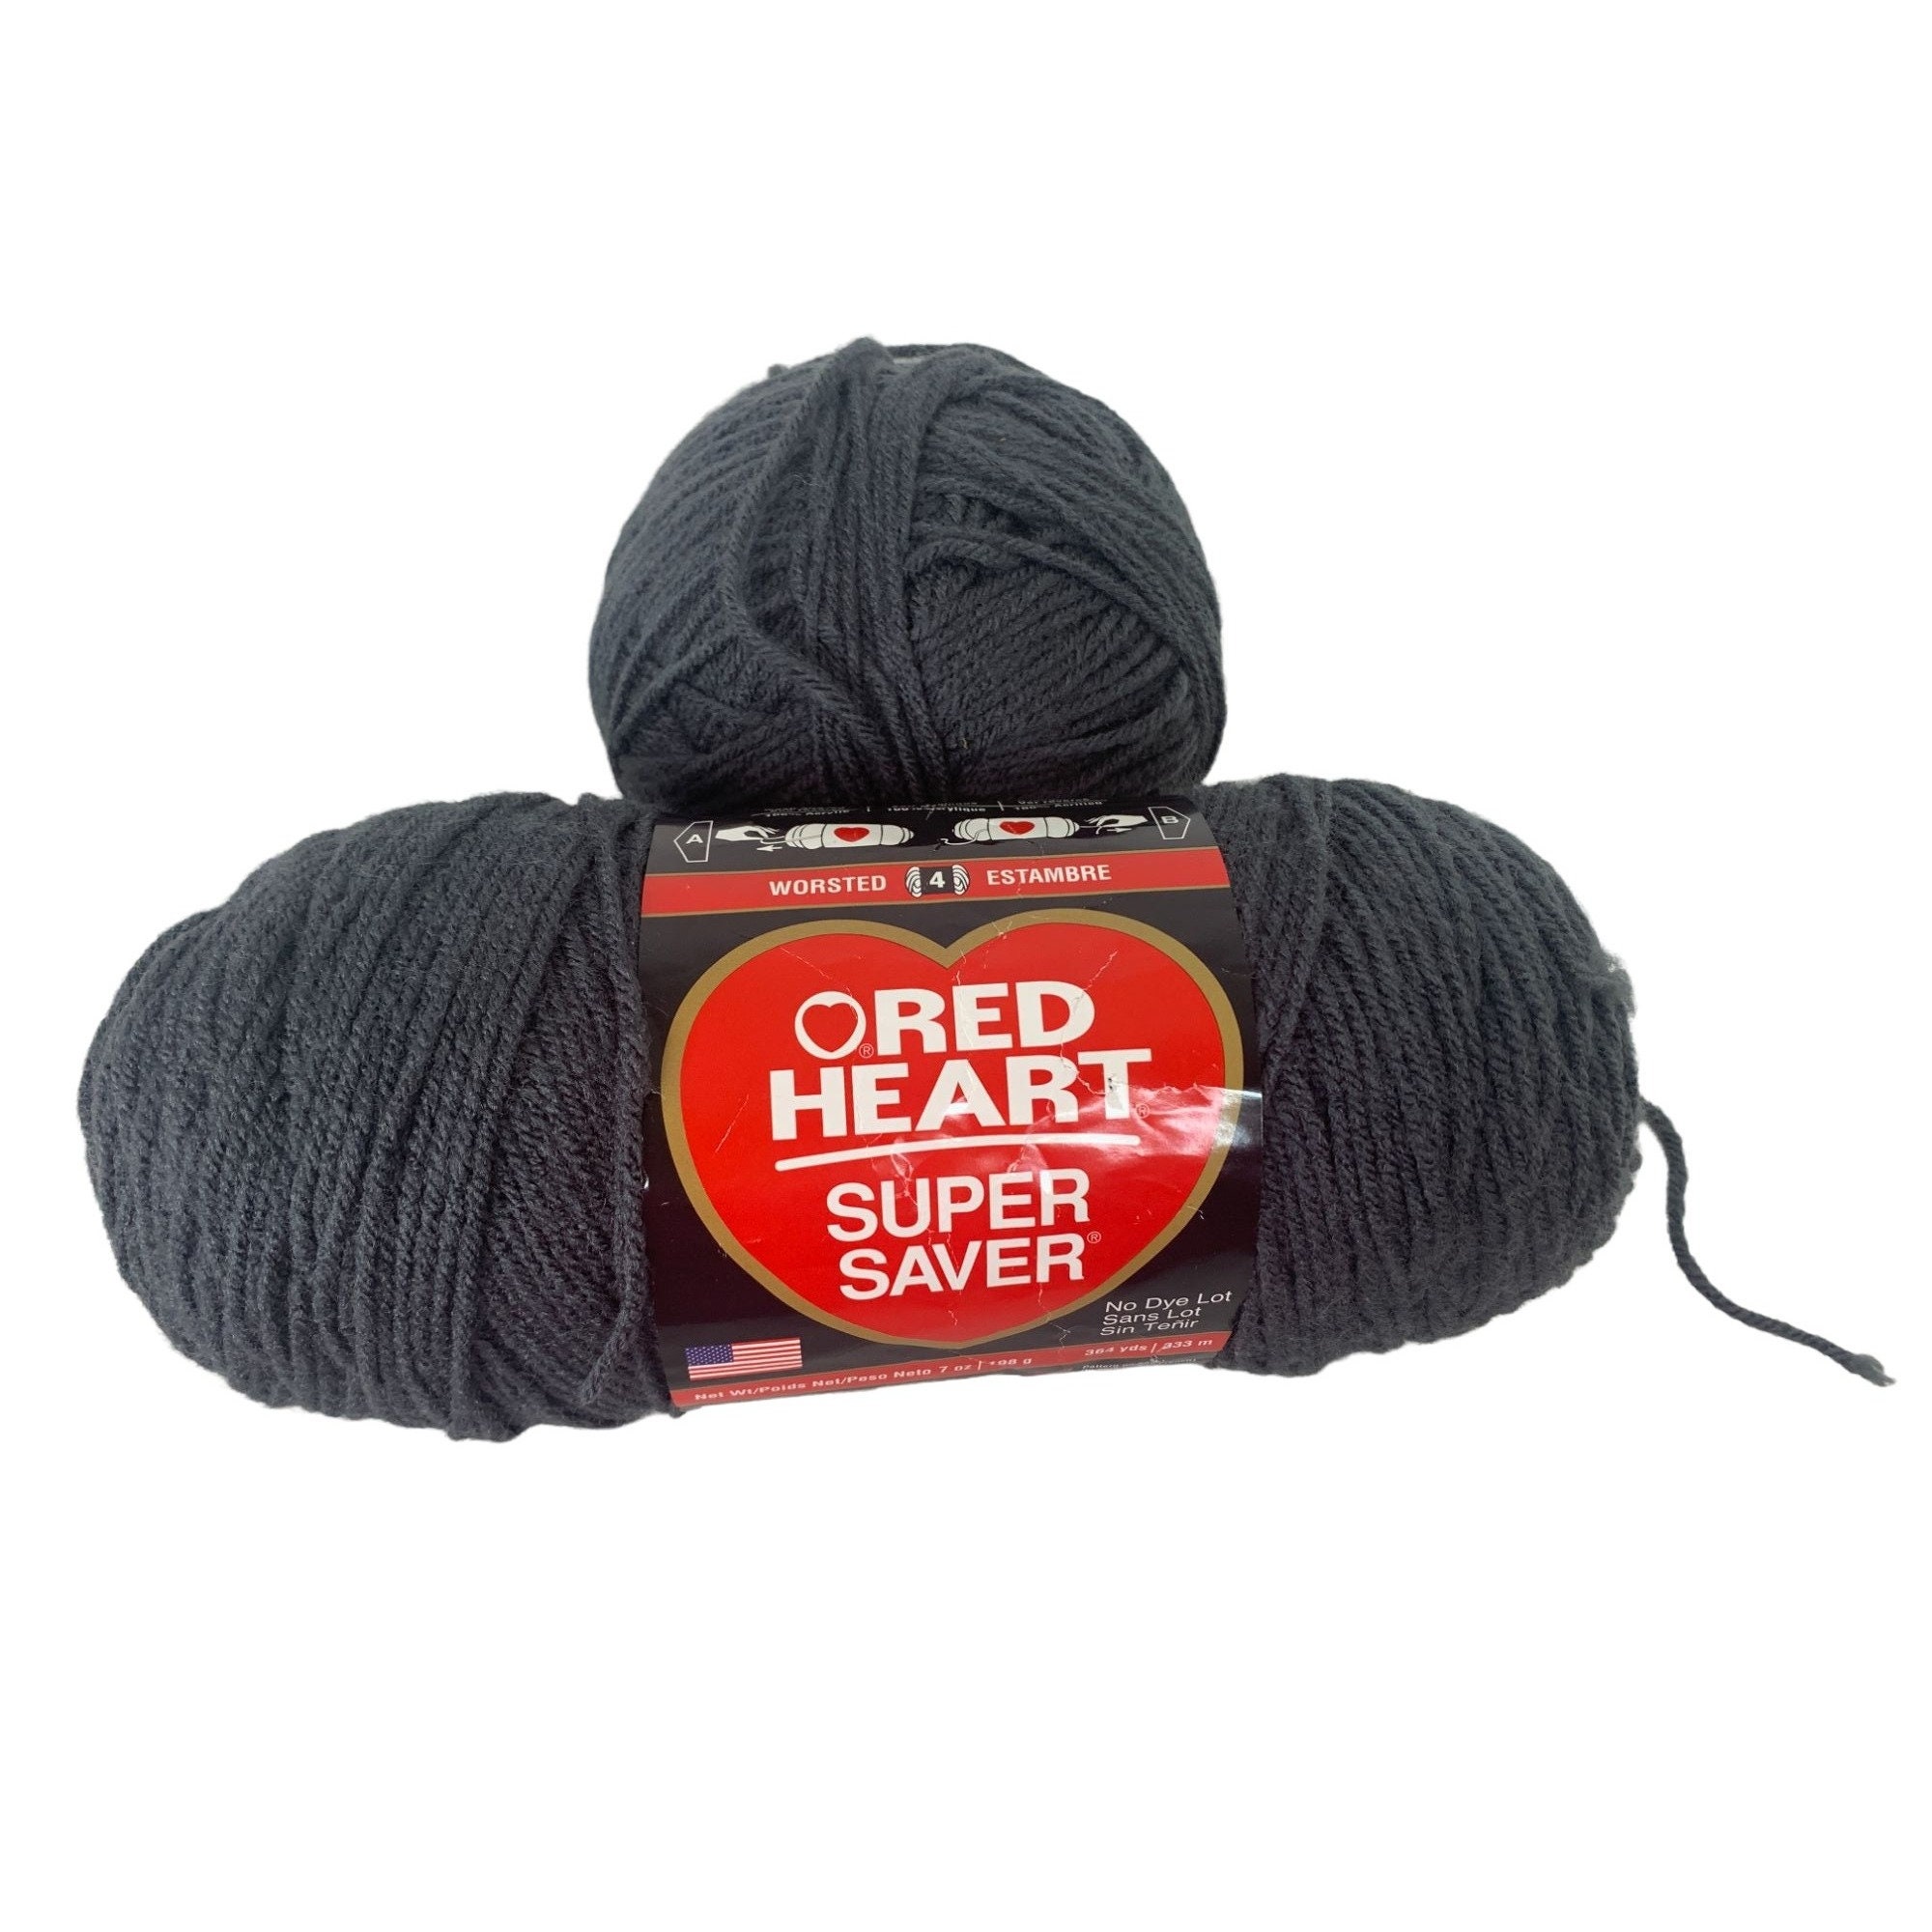 Red Heart Super Saver Yarn CHARCOAL (2 Pack) Medium Worsted 7 oz No Dye Lot